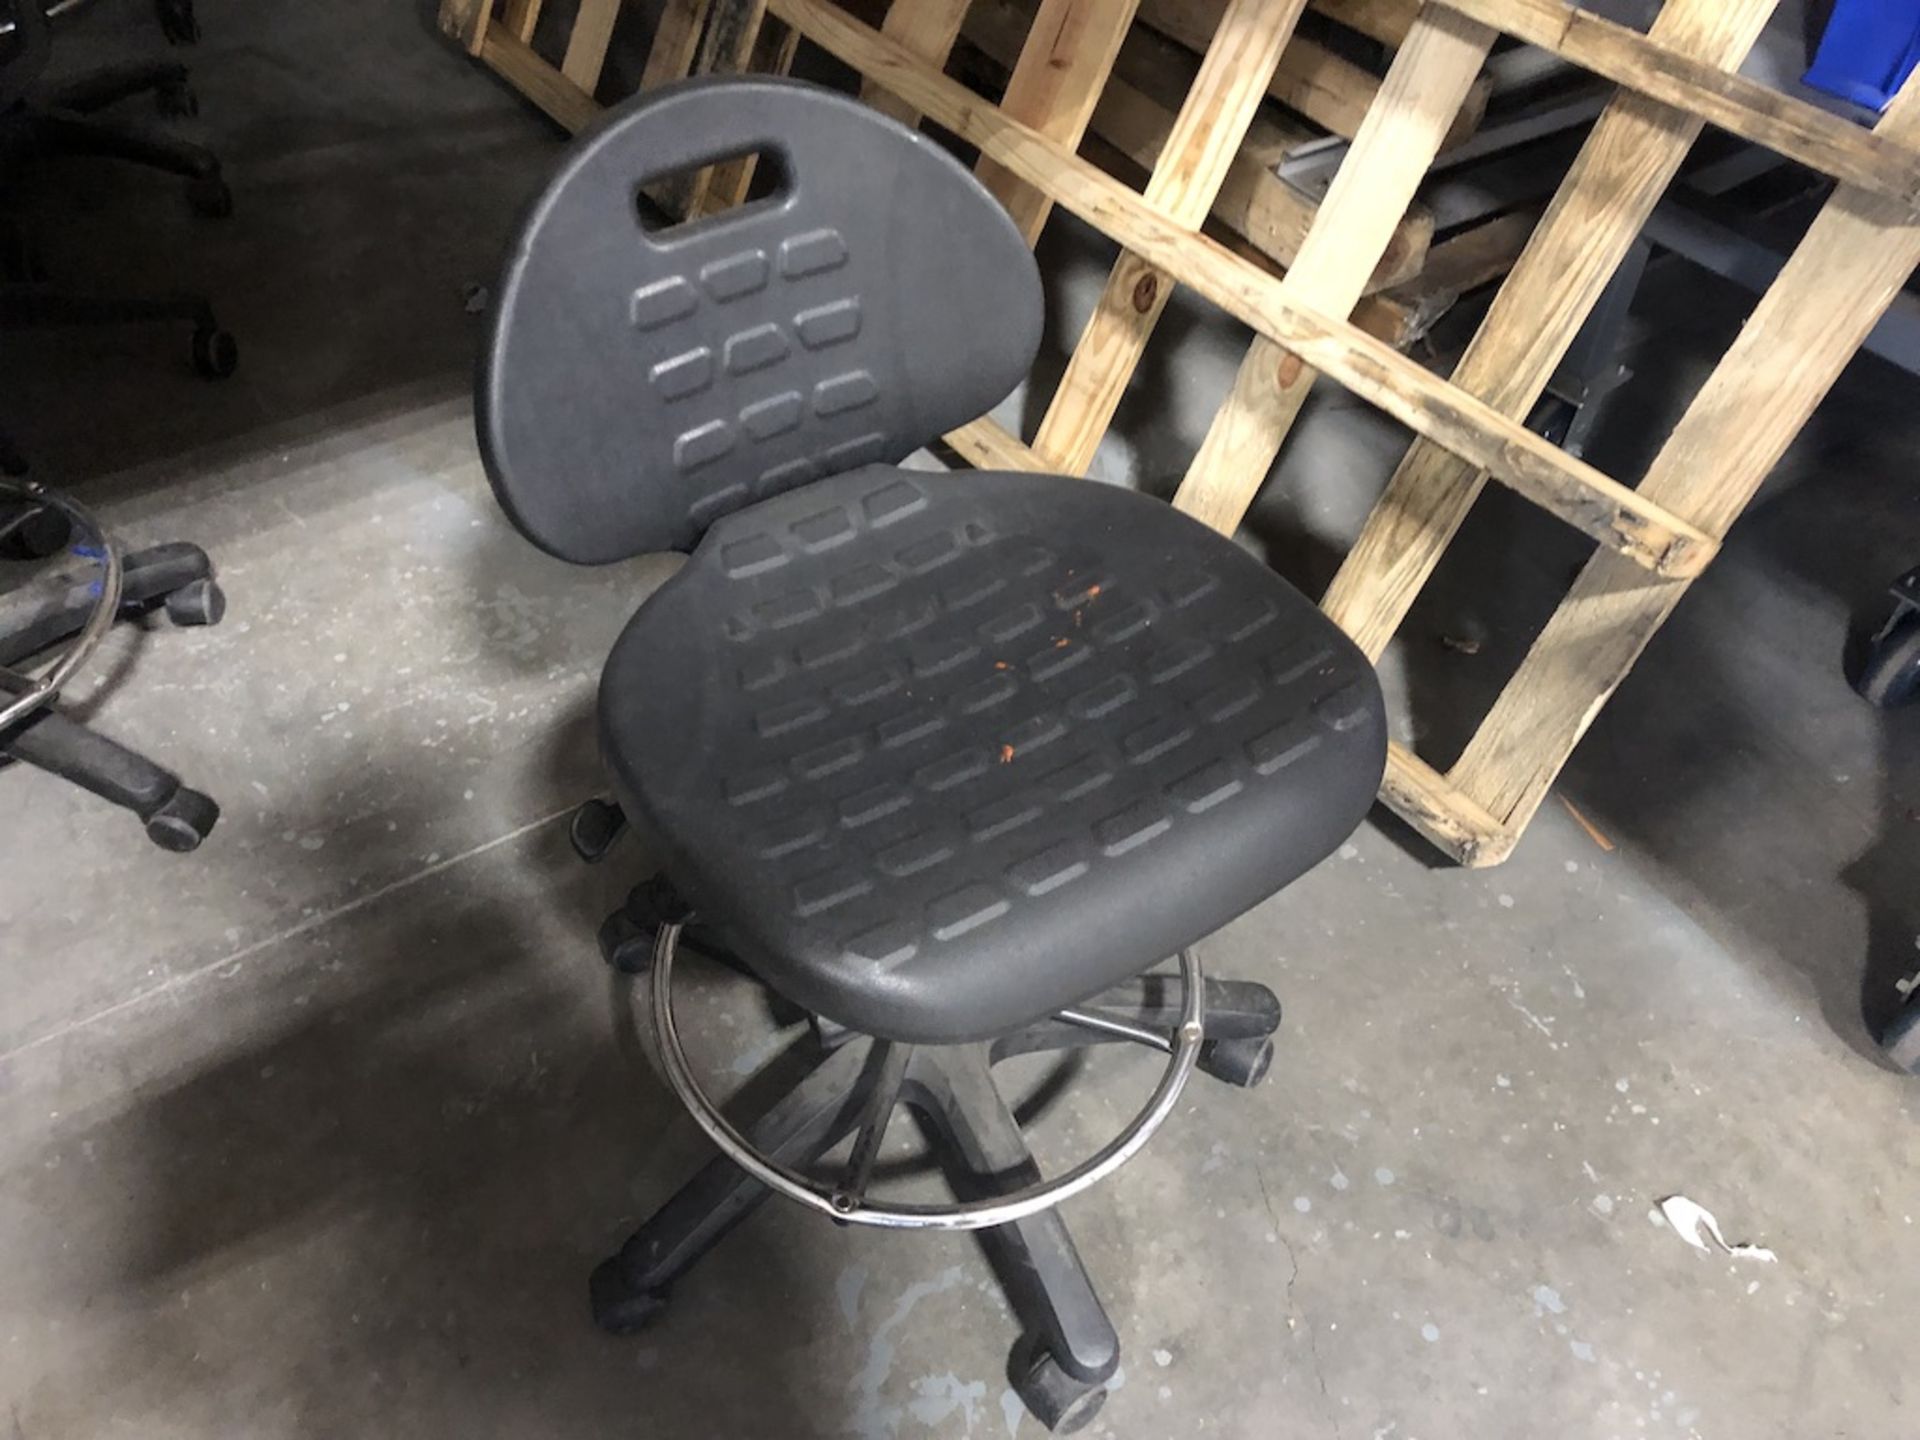 5 CASTER BLACK OFFICE CHAIR - Image 2 of 4